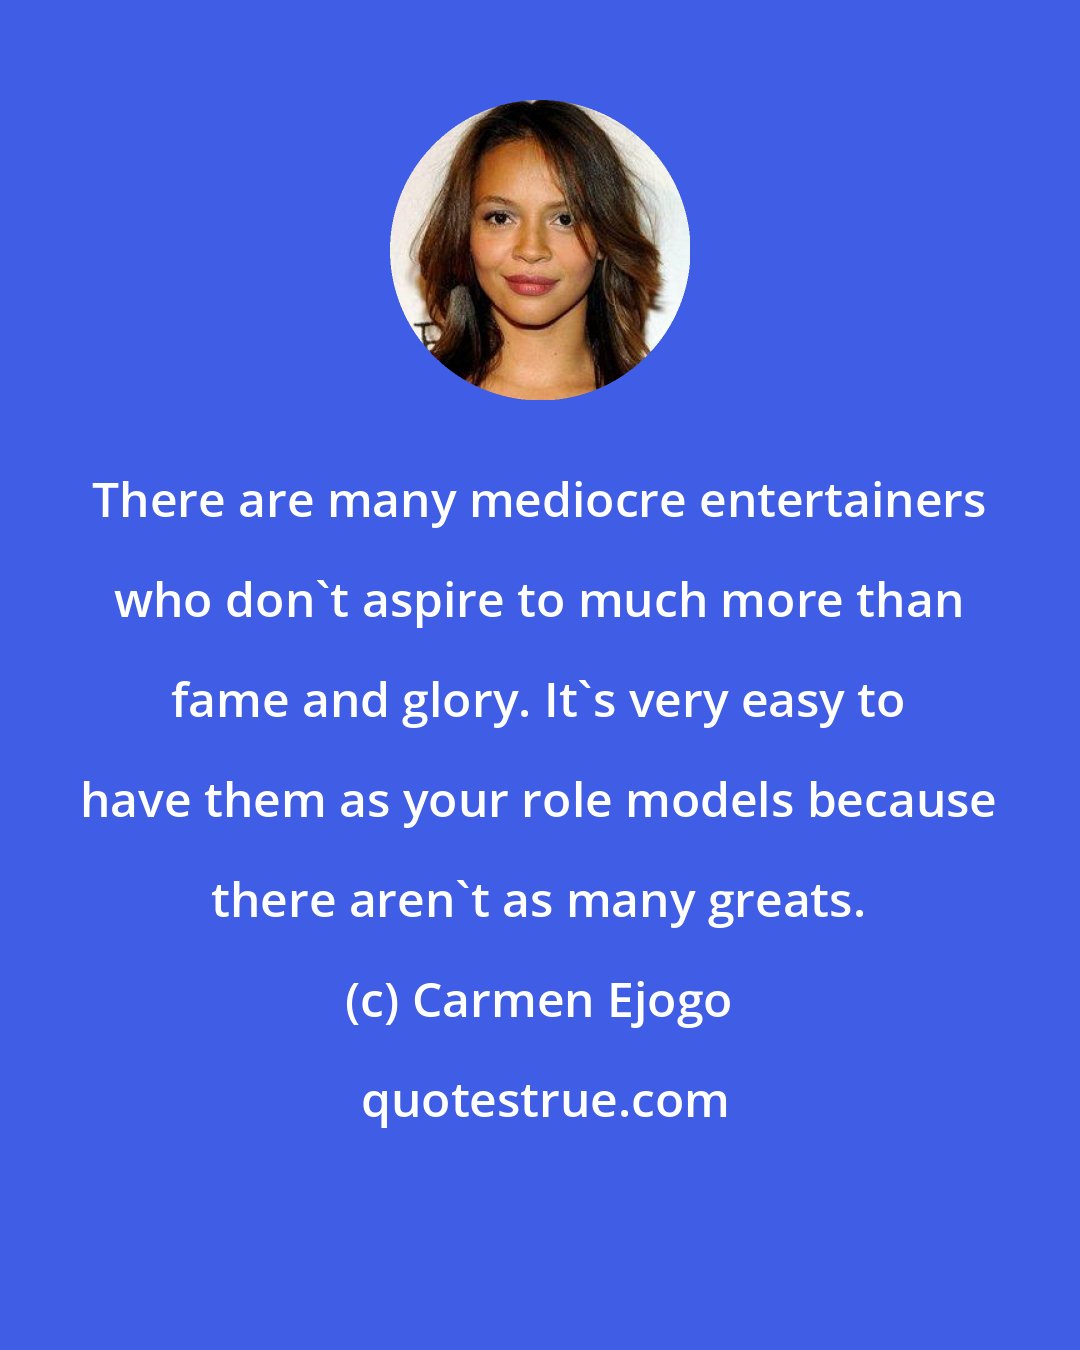 Carmen Ejogo: There are many mediocre entertainers who don't aspire to much more than fame and glory. It's very easy to have them as your role models because there aren't as many greats.